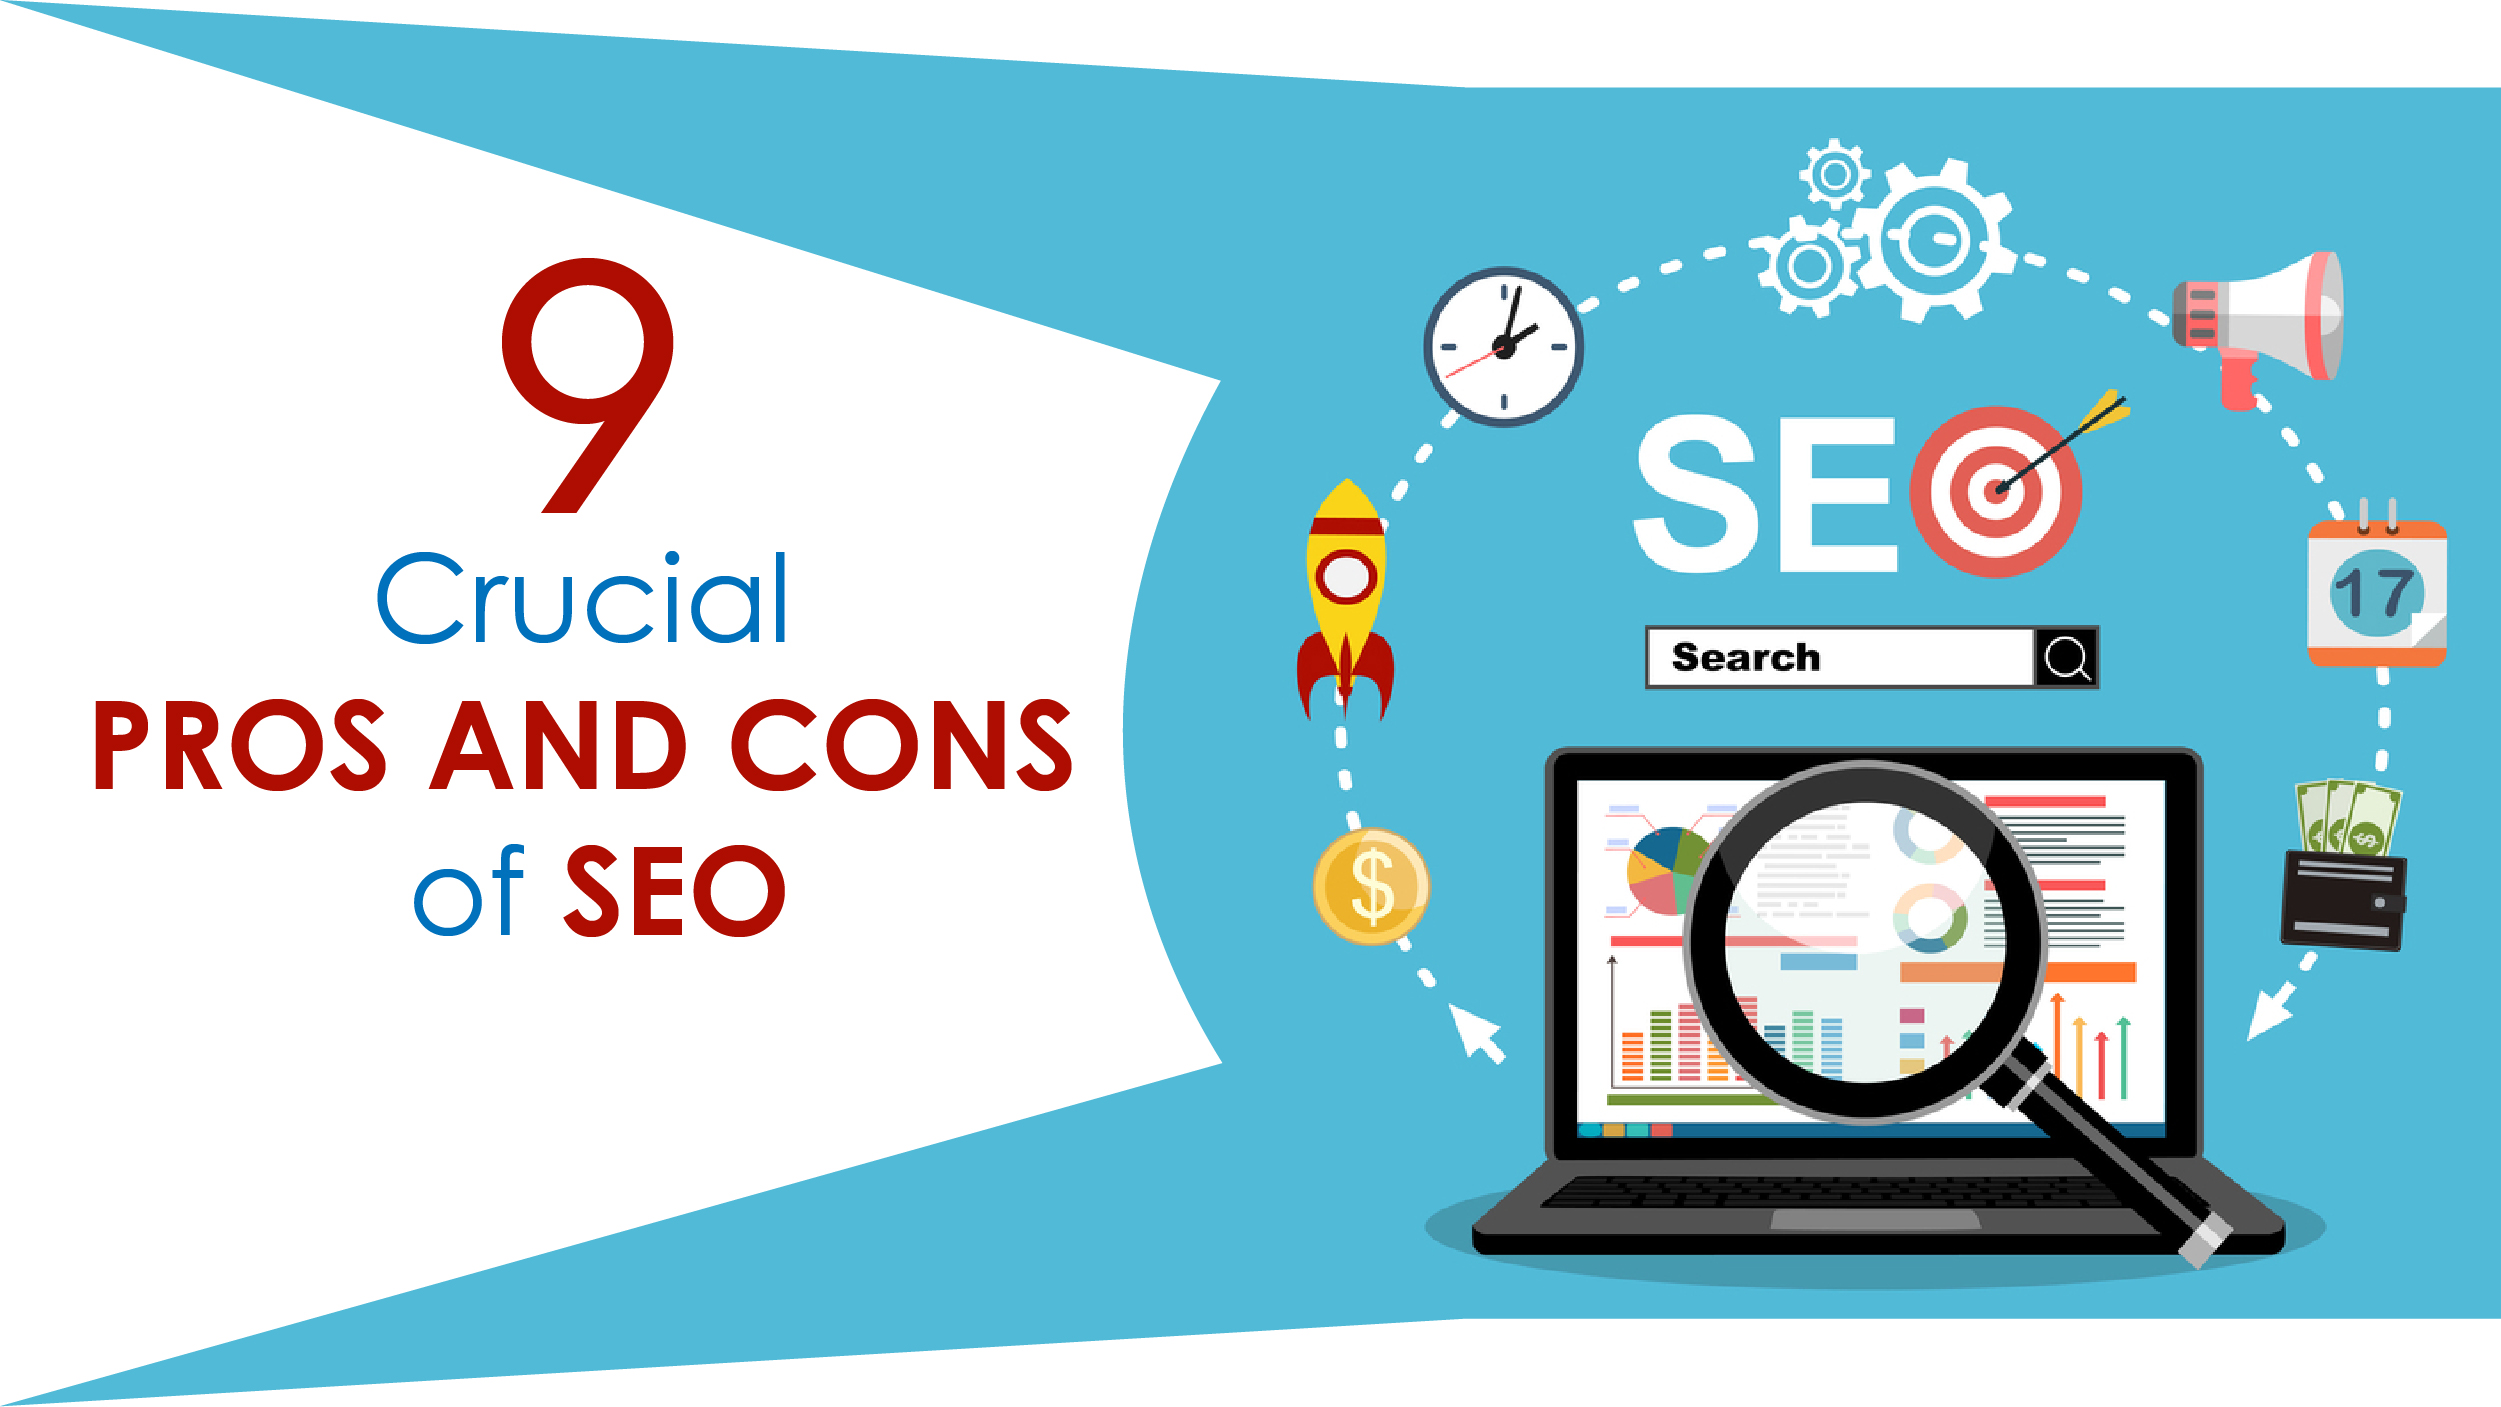 9 crucial pros and cons of Search Engine optimization